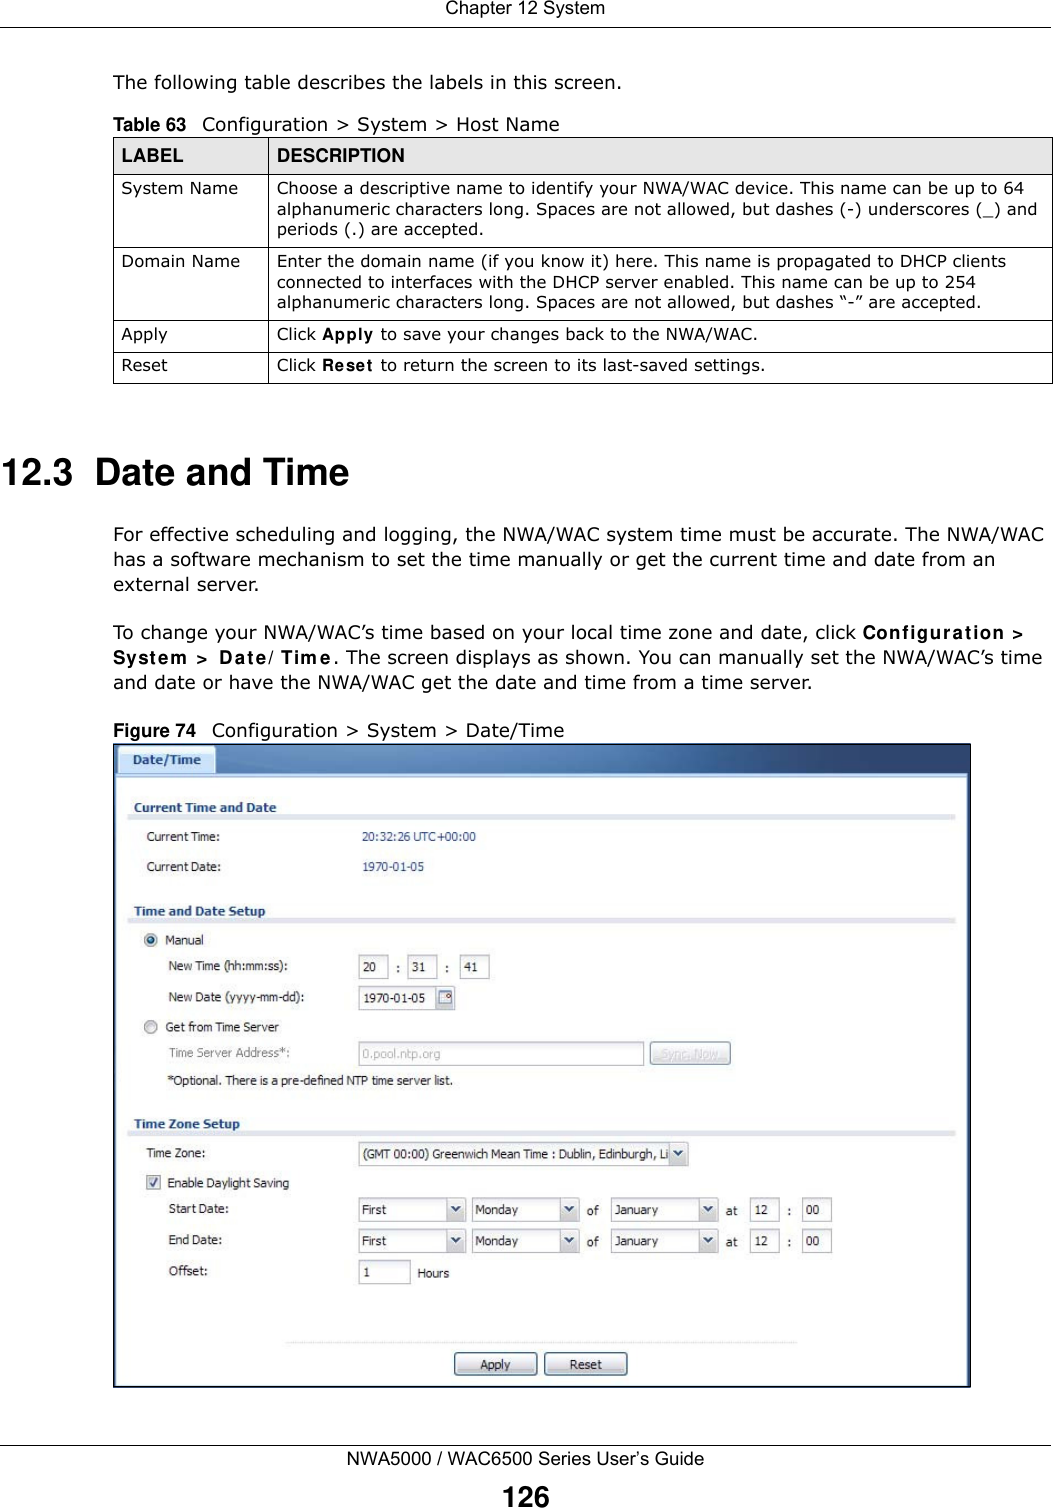 Chapter 12 SystemNWA5000 / WAC6500 Series User’s Guide126The following table describes the labels in this screen. 12.3  Date and Time For effective scheduling and logging, the NWA/WAC system time must be accurate. The NWA/WAC has a software mechanism to set the time manually or get the current time and date from an external server.To change your NWA/WAC’s time based on your local time zone and date, click Configu ra tion &gt;  Syst em  &gt;  D a t e/ Tim e. The screen displays as shown. You can manually set the NWA/WAC’s time and date or have the NWA/WAC get the date and time from a time server.Figure 74   Configuration &gt; System &gt; Date/TimeTable 63   Configuration &gt; System &gt; Host NameLABEL DESCRIPTIONSystem Name Choose a descriptive name to identify your NWA/WAC device. This name can be up to 64 alphanumeric characters long. Spaces are not allowed, but dashes (-) underscores (_) and periods (.) are accepted.Domain Name Enter the domain name (if you know it) here. This name is propagated to DHCP clients connected to interfaces with the DHCP server enabled. This name can be up to 254 alphanumeric characters long. Spaces are not allowed, but dashes “-” are accepted.Apply Click Apply to save your changes back to the NWA/WAC.Reset Click Re se t  to return the screen to its last-saved settings. 